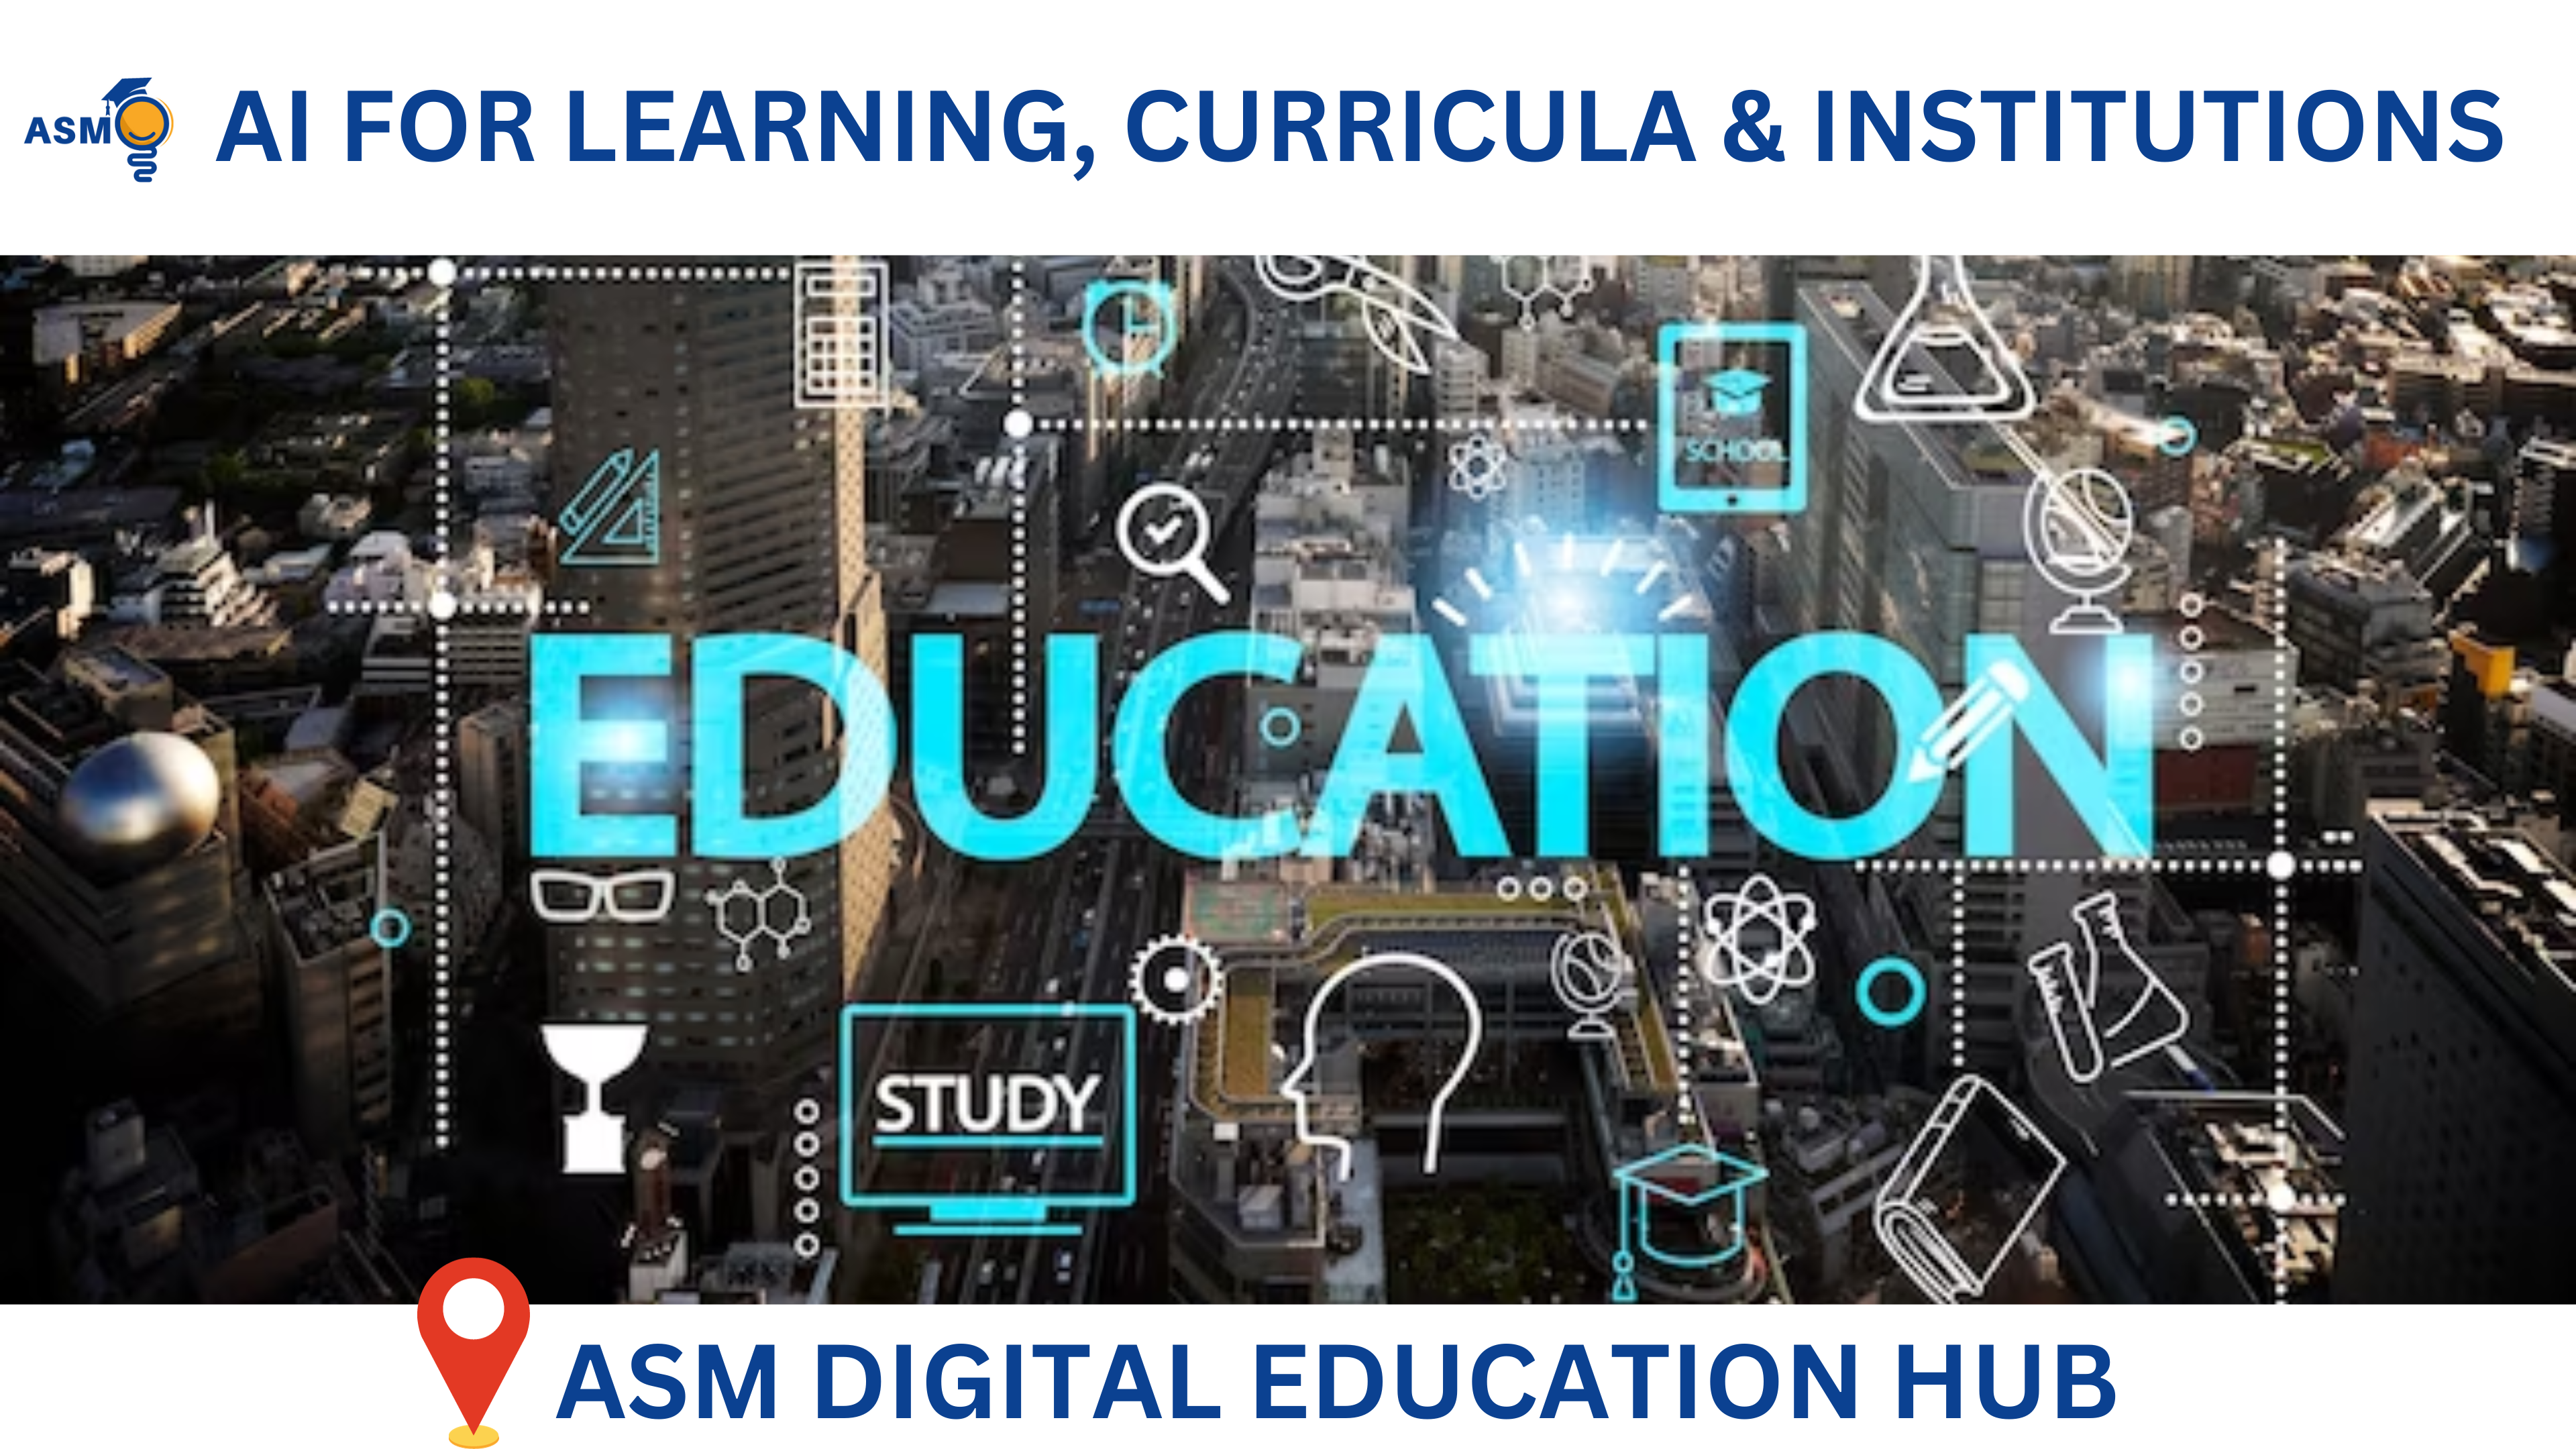 #Artificial intelligence, #higher education #elearning